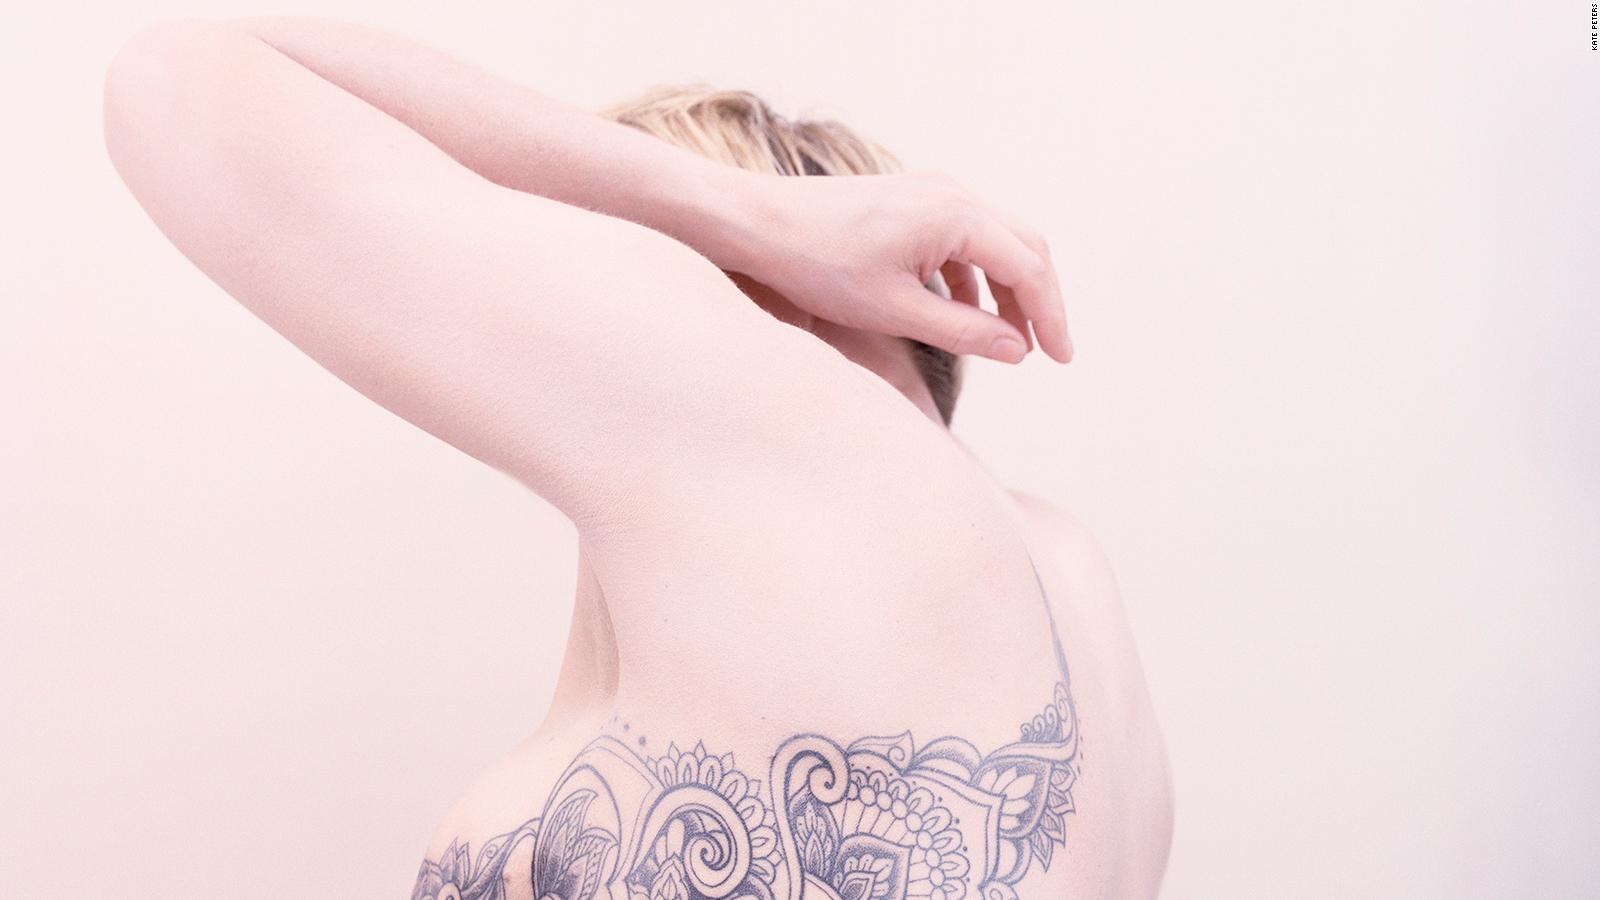 Black light tattoos nude women Photographer Kate Peters Shows The Beauty Of Mastectomy Tattoos Cnn Style